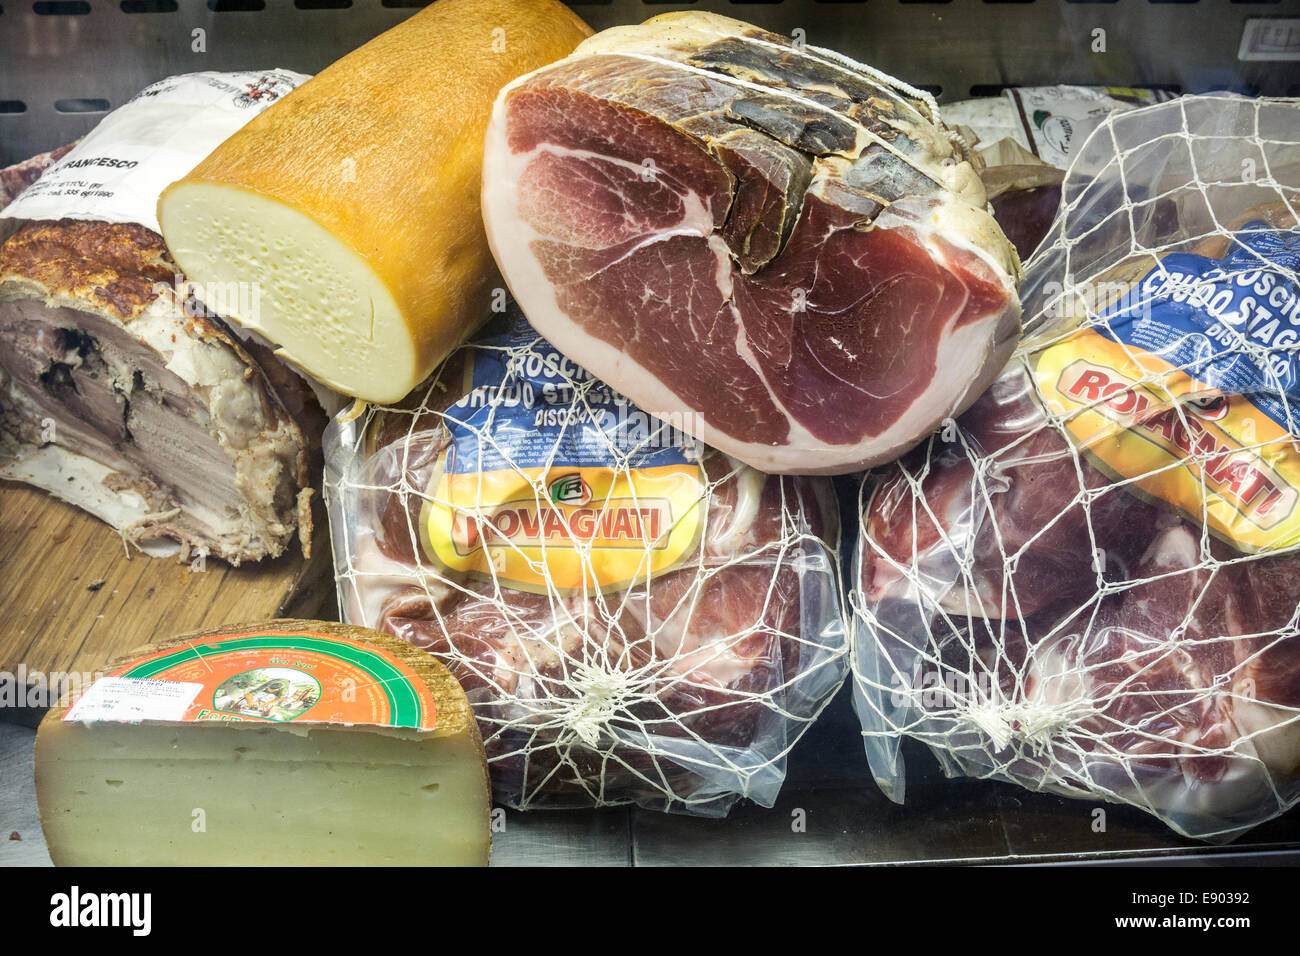 delicious tempting display of prosciutto cheeses & pork terrine in window of small shop selling Italian cold cuts prepared food Stock Photo